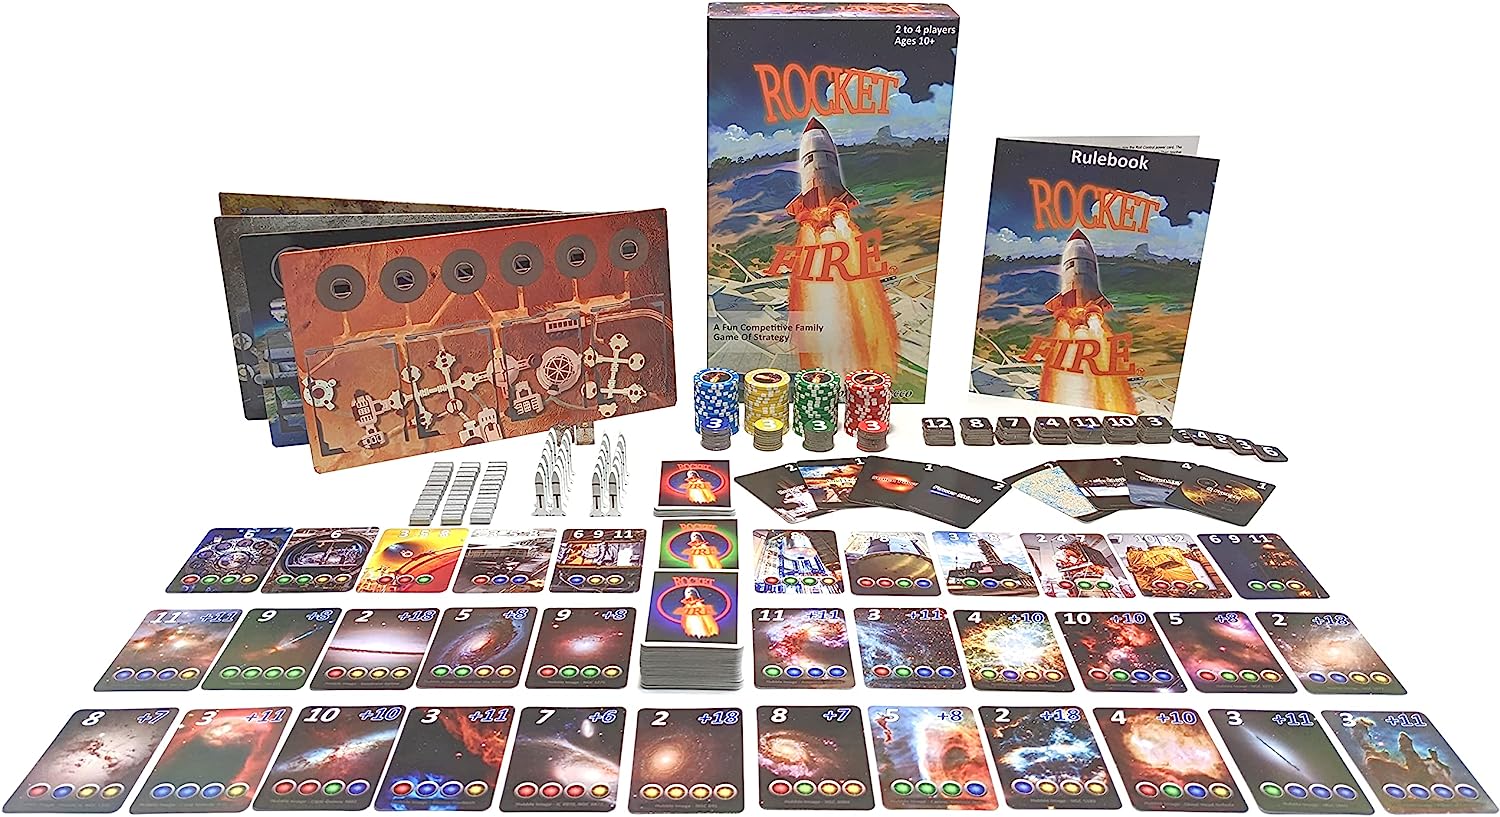 Rocket Fire - Family Board Game - Board Game for Adults and Family - Space Game - Ages 10 and Up - Average Play Time 30 Minutes - for 2 to 4 Players